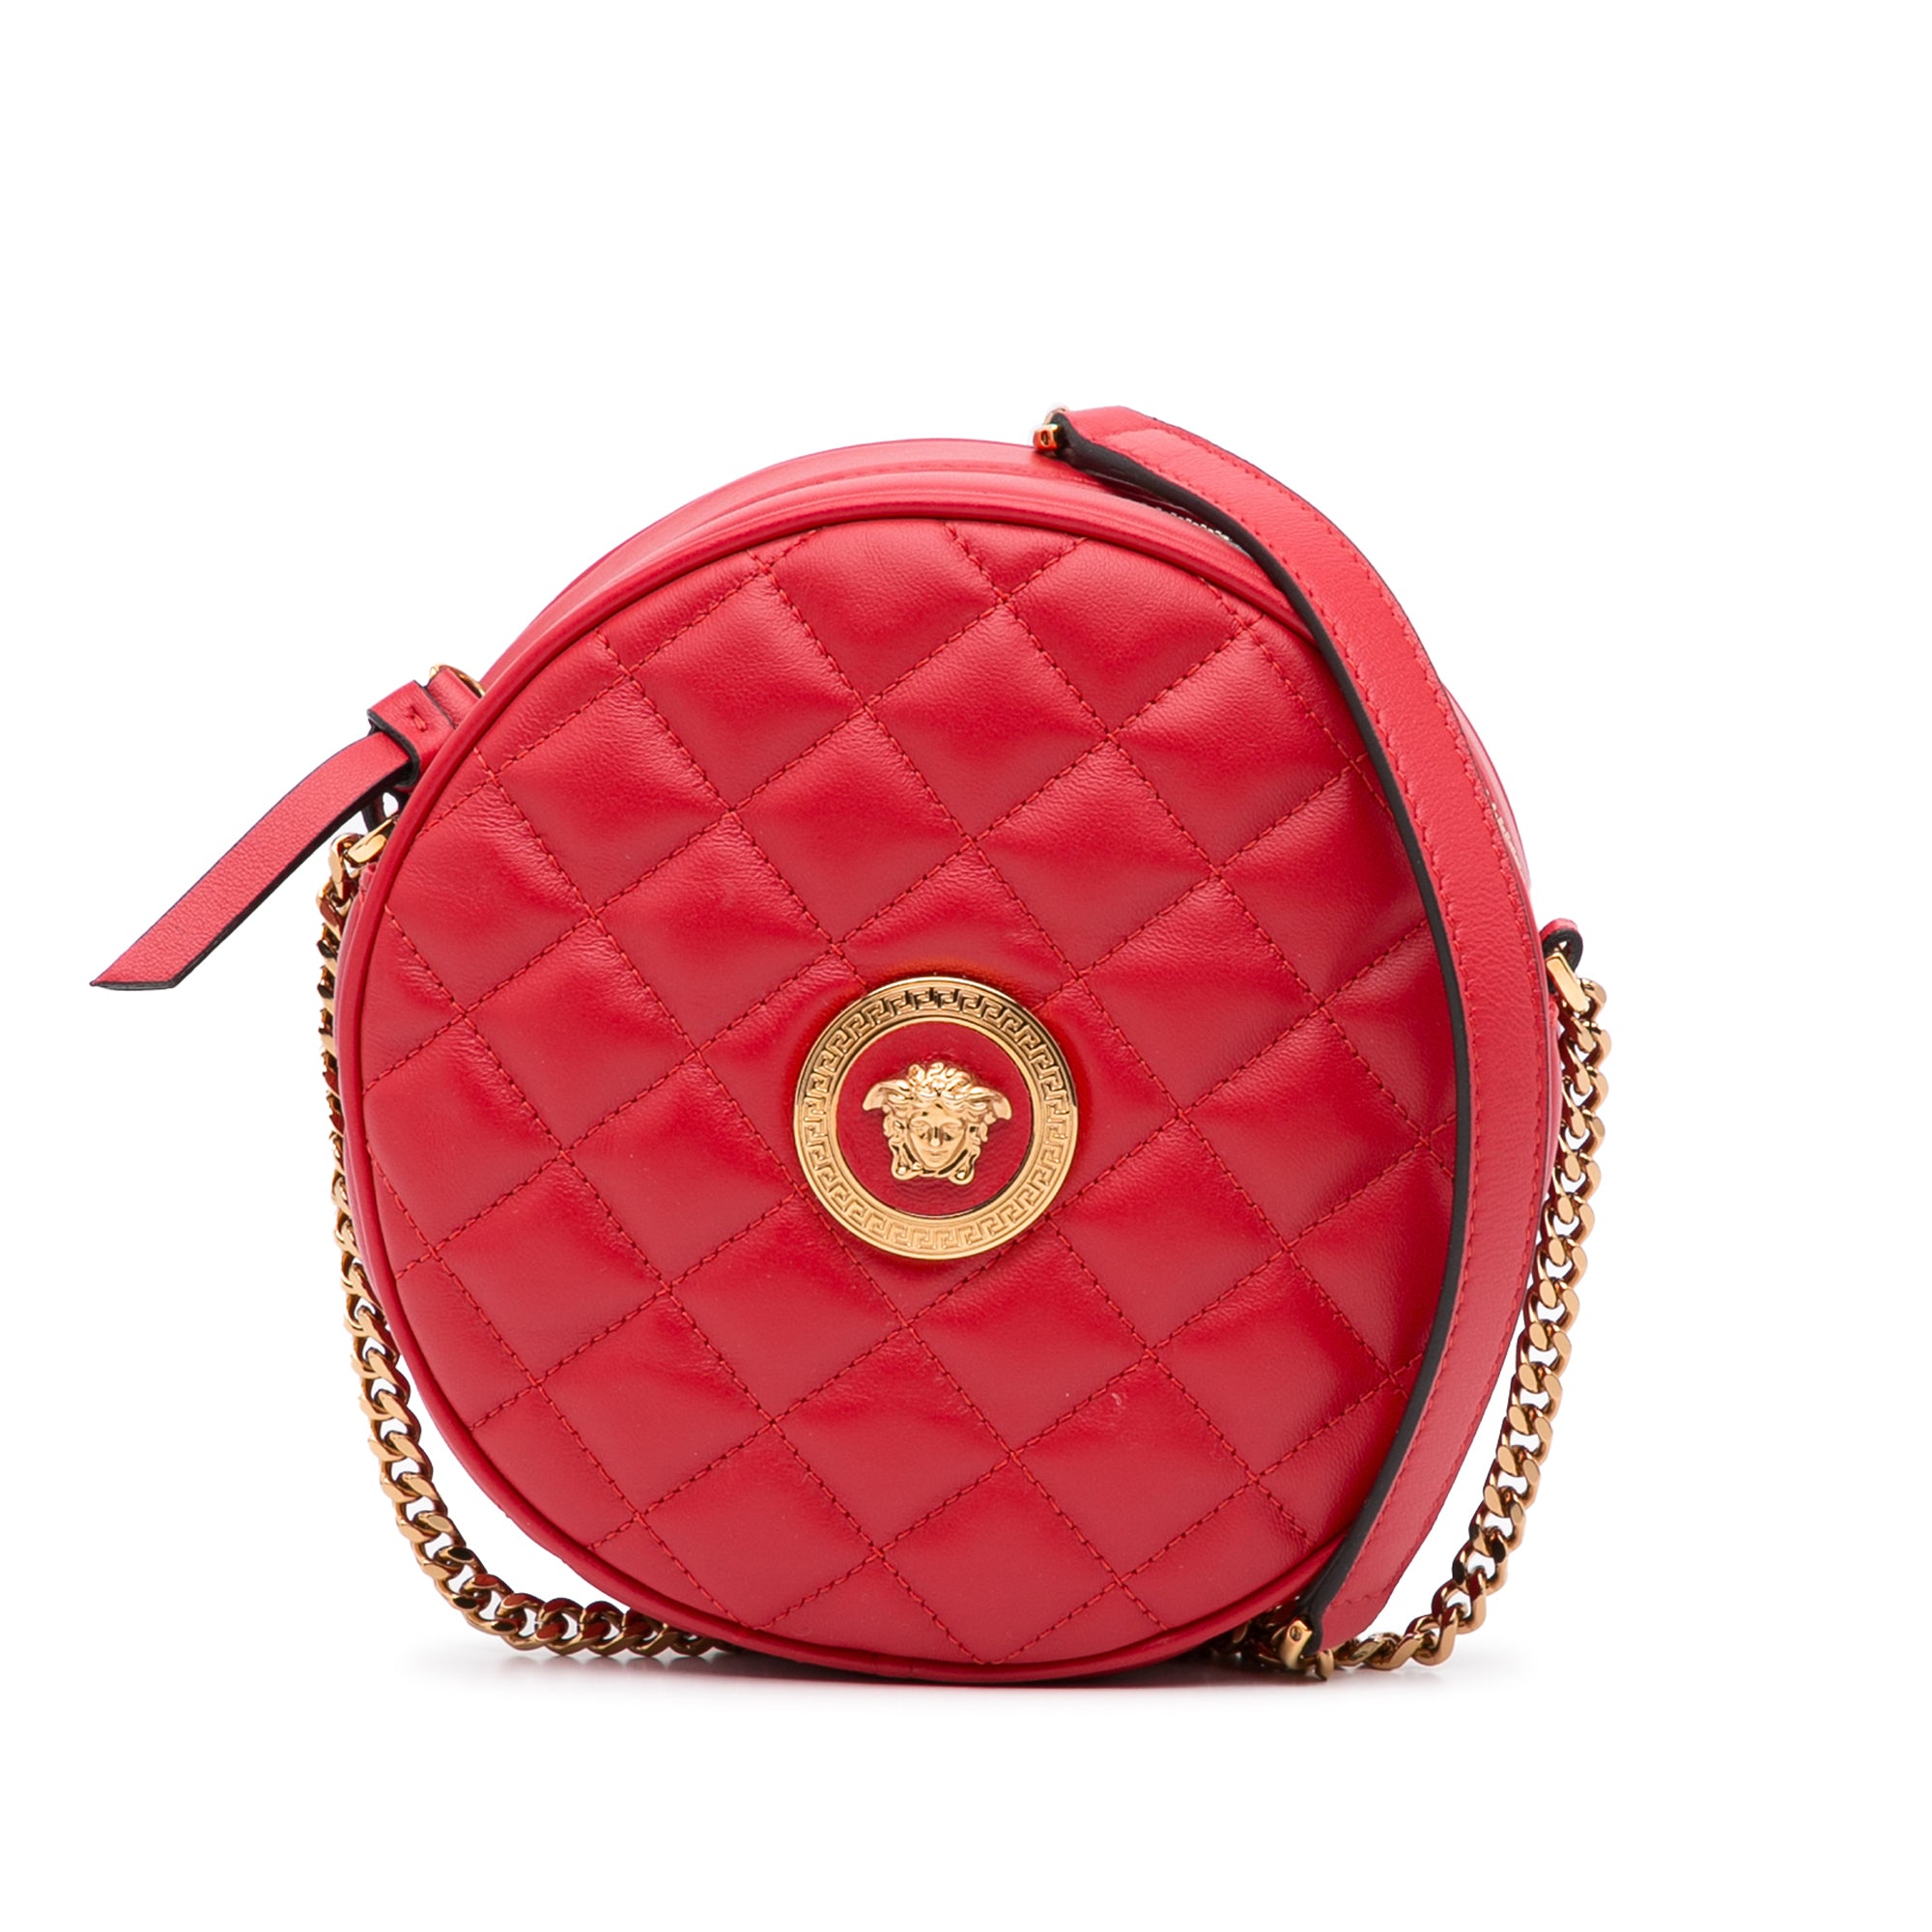 Versace Quilted Round La Medusa Camera Bag in Red, Women's